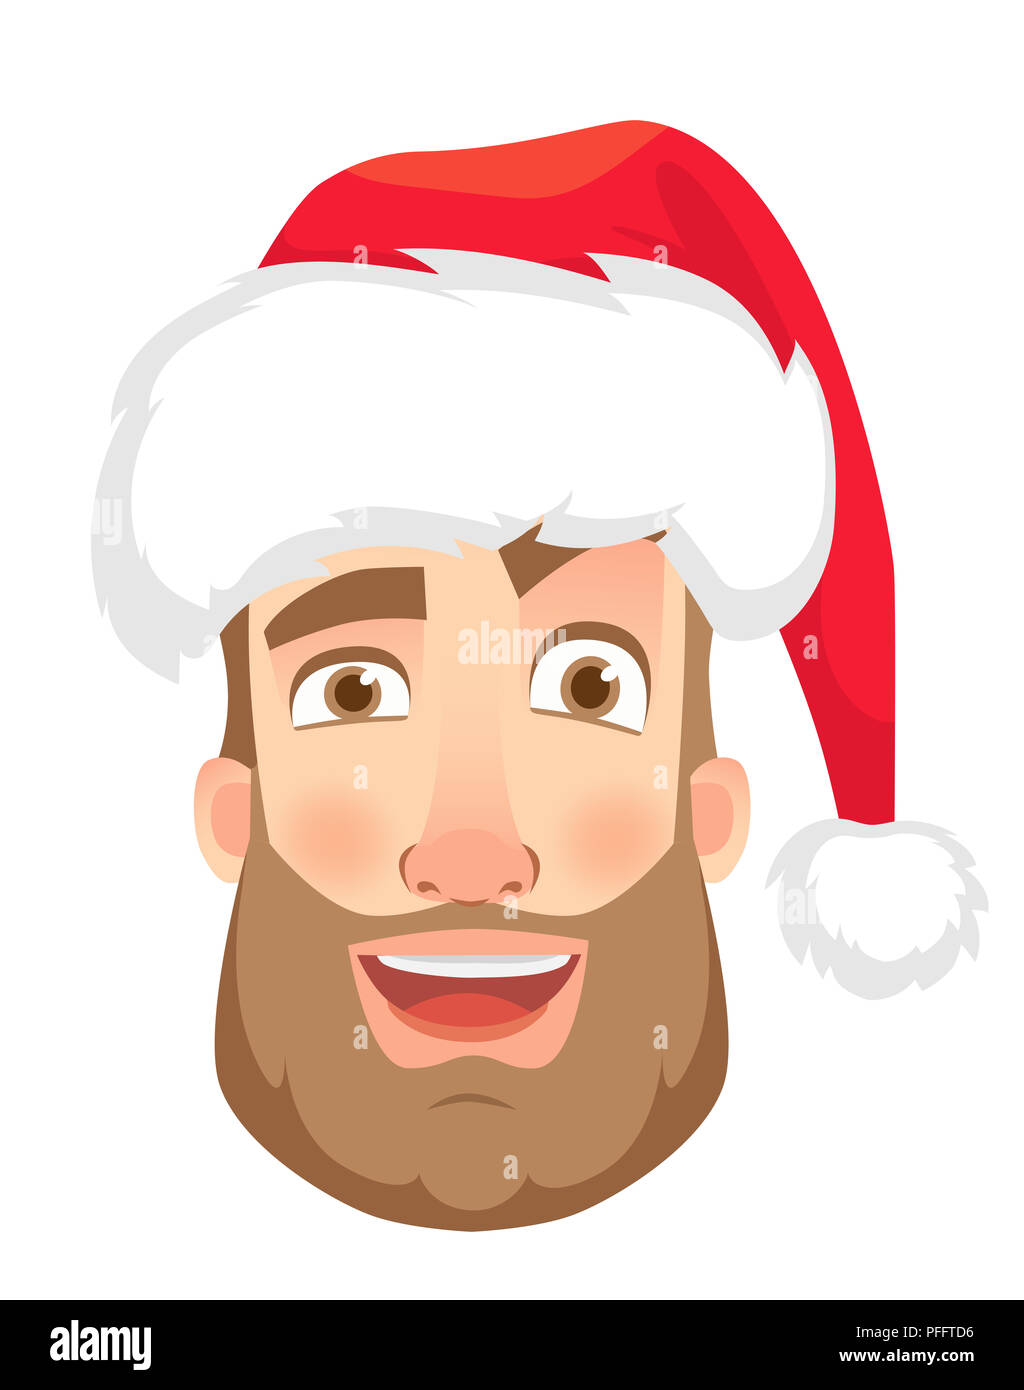 Head of a man in a Santa Claus hat. Man face expression. Human emotions. Set of cartoon illustrations. Laugh Stock Photo